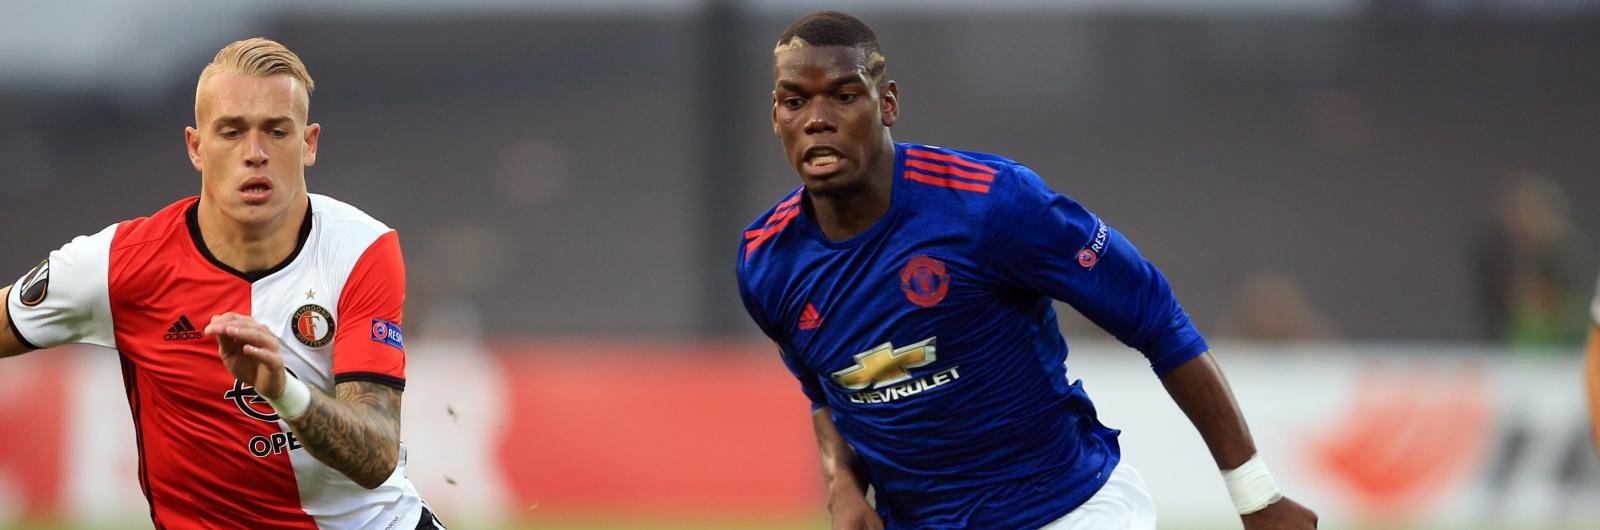 3 Serie A players who could follow Paul Pogba to Manchester United in January